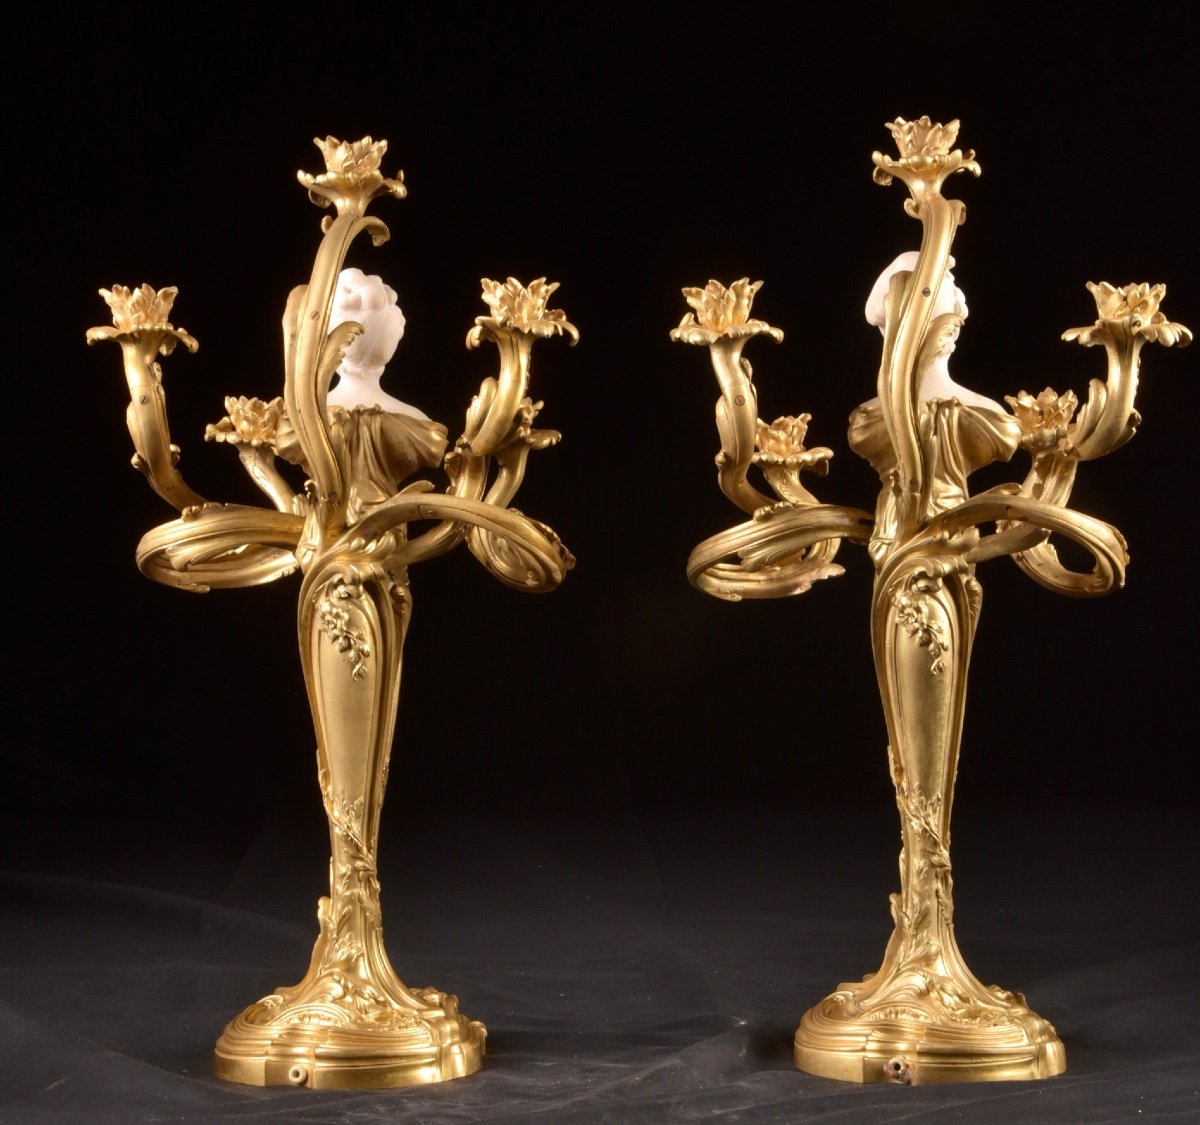 A Large Rare Pair Of 19th Century Louis XVI Style Five-armed Candlesticks-photo-2